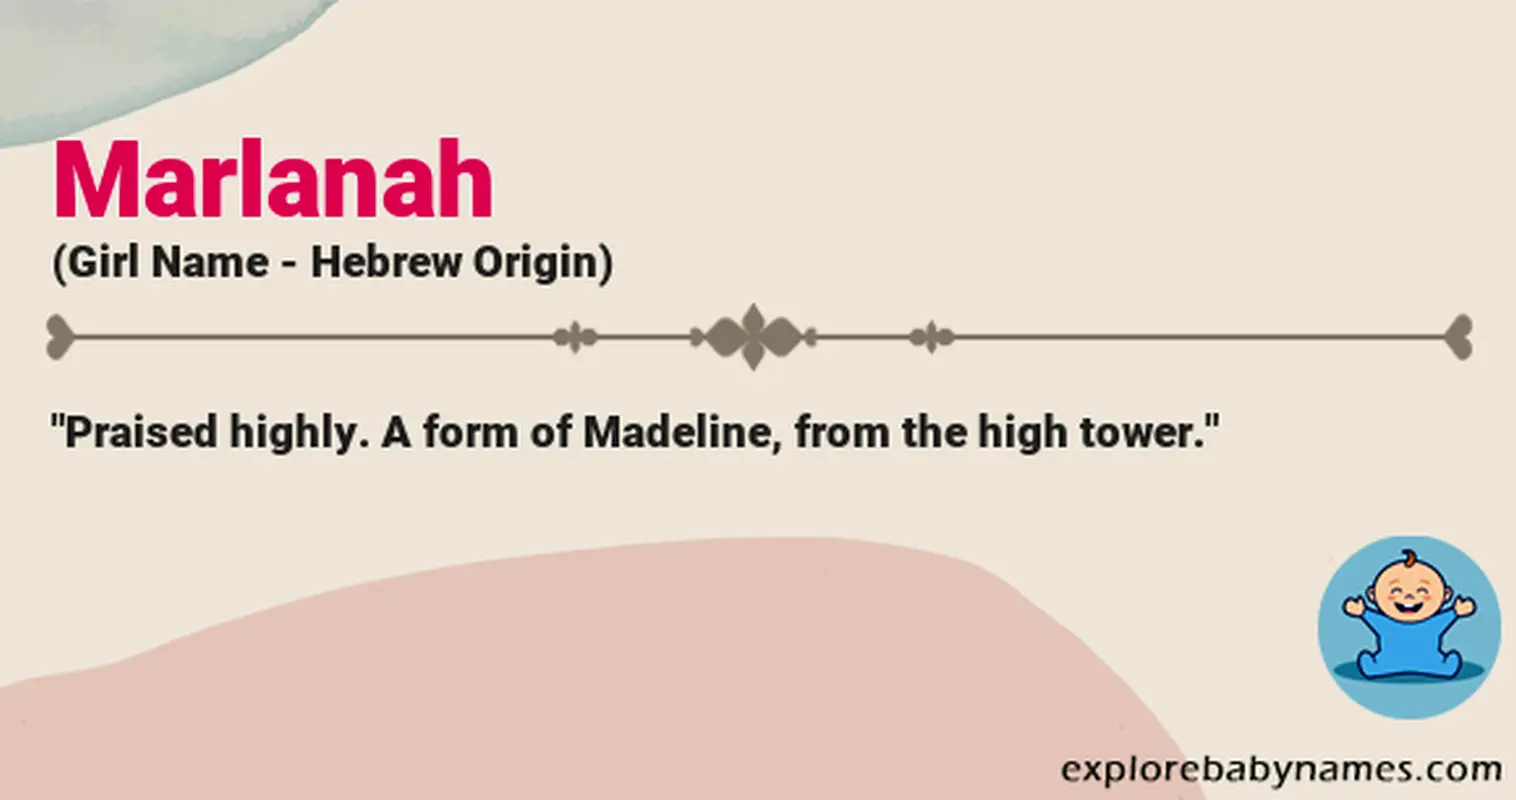 Meaning of Marlanah